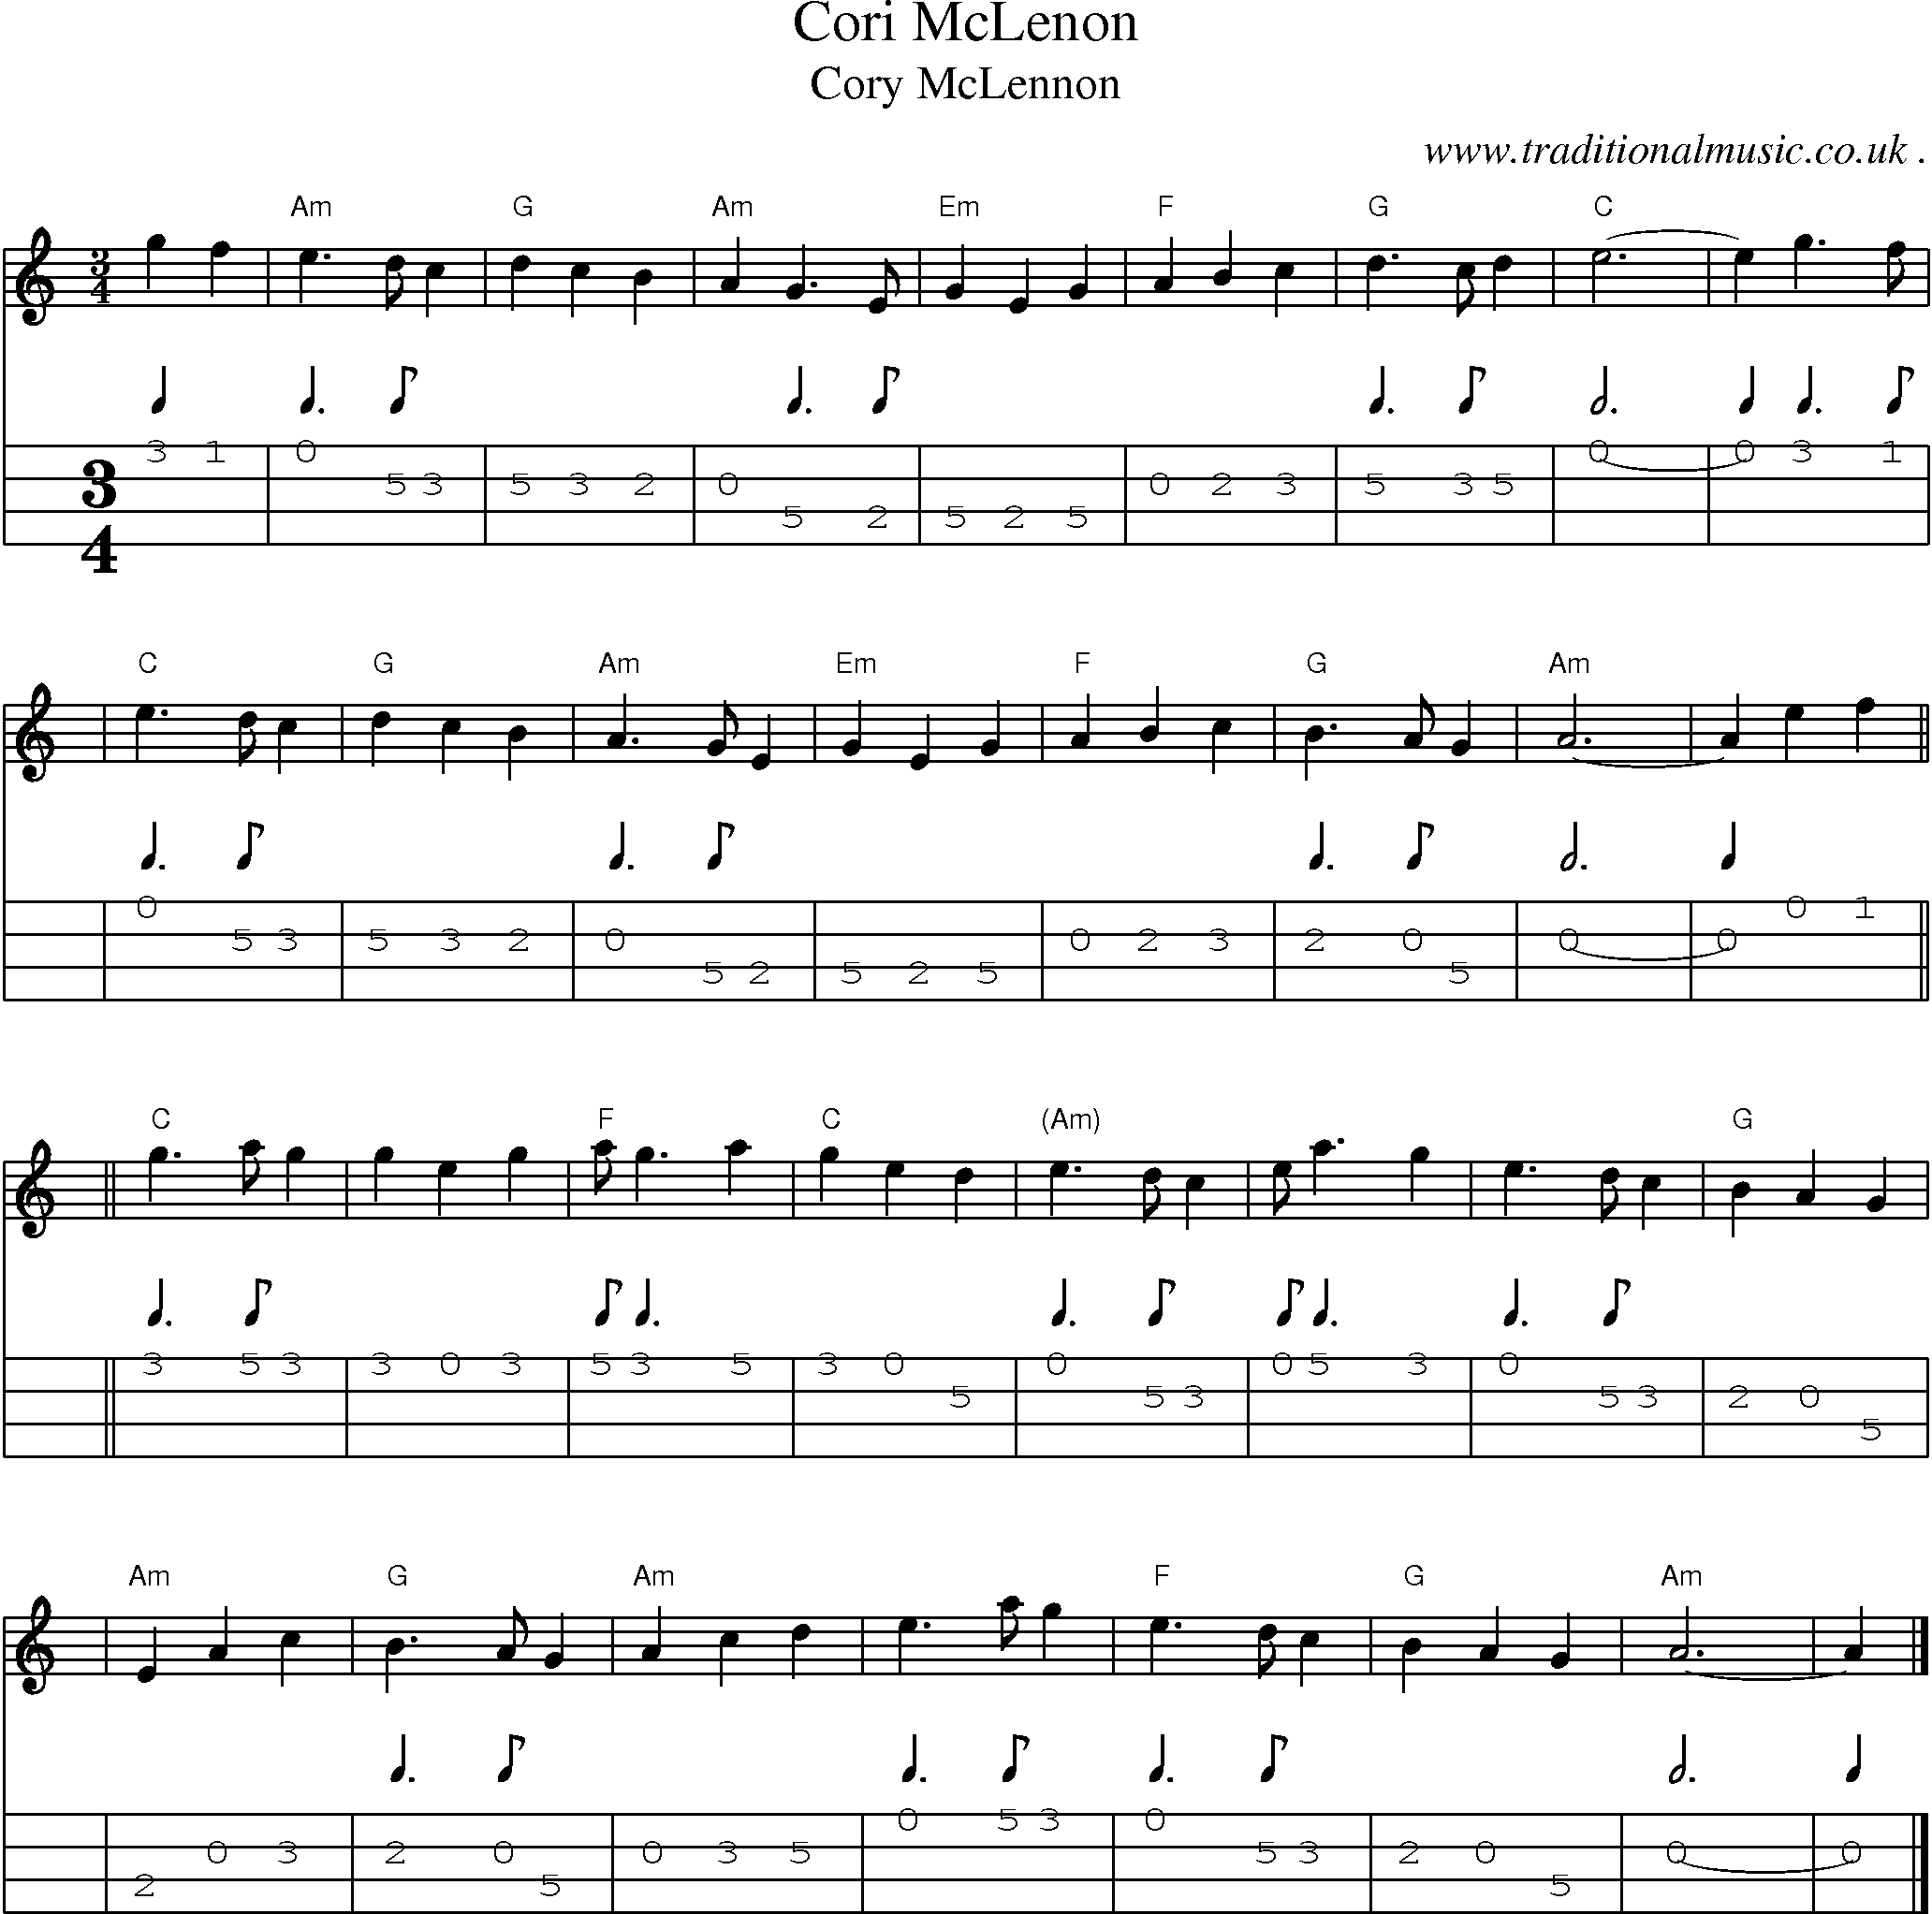 Sheet-music  score, Chords and Mandolin Tabs for Cori Mclenon